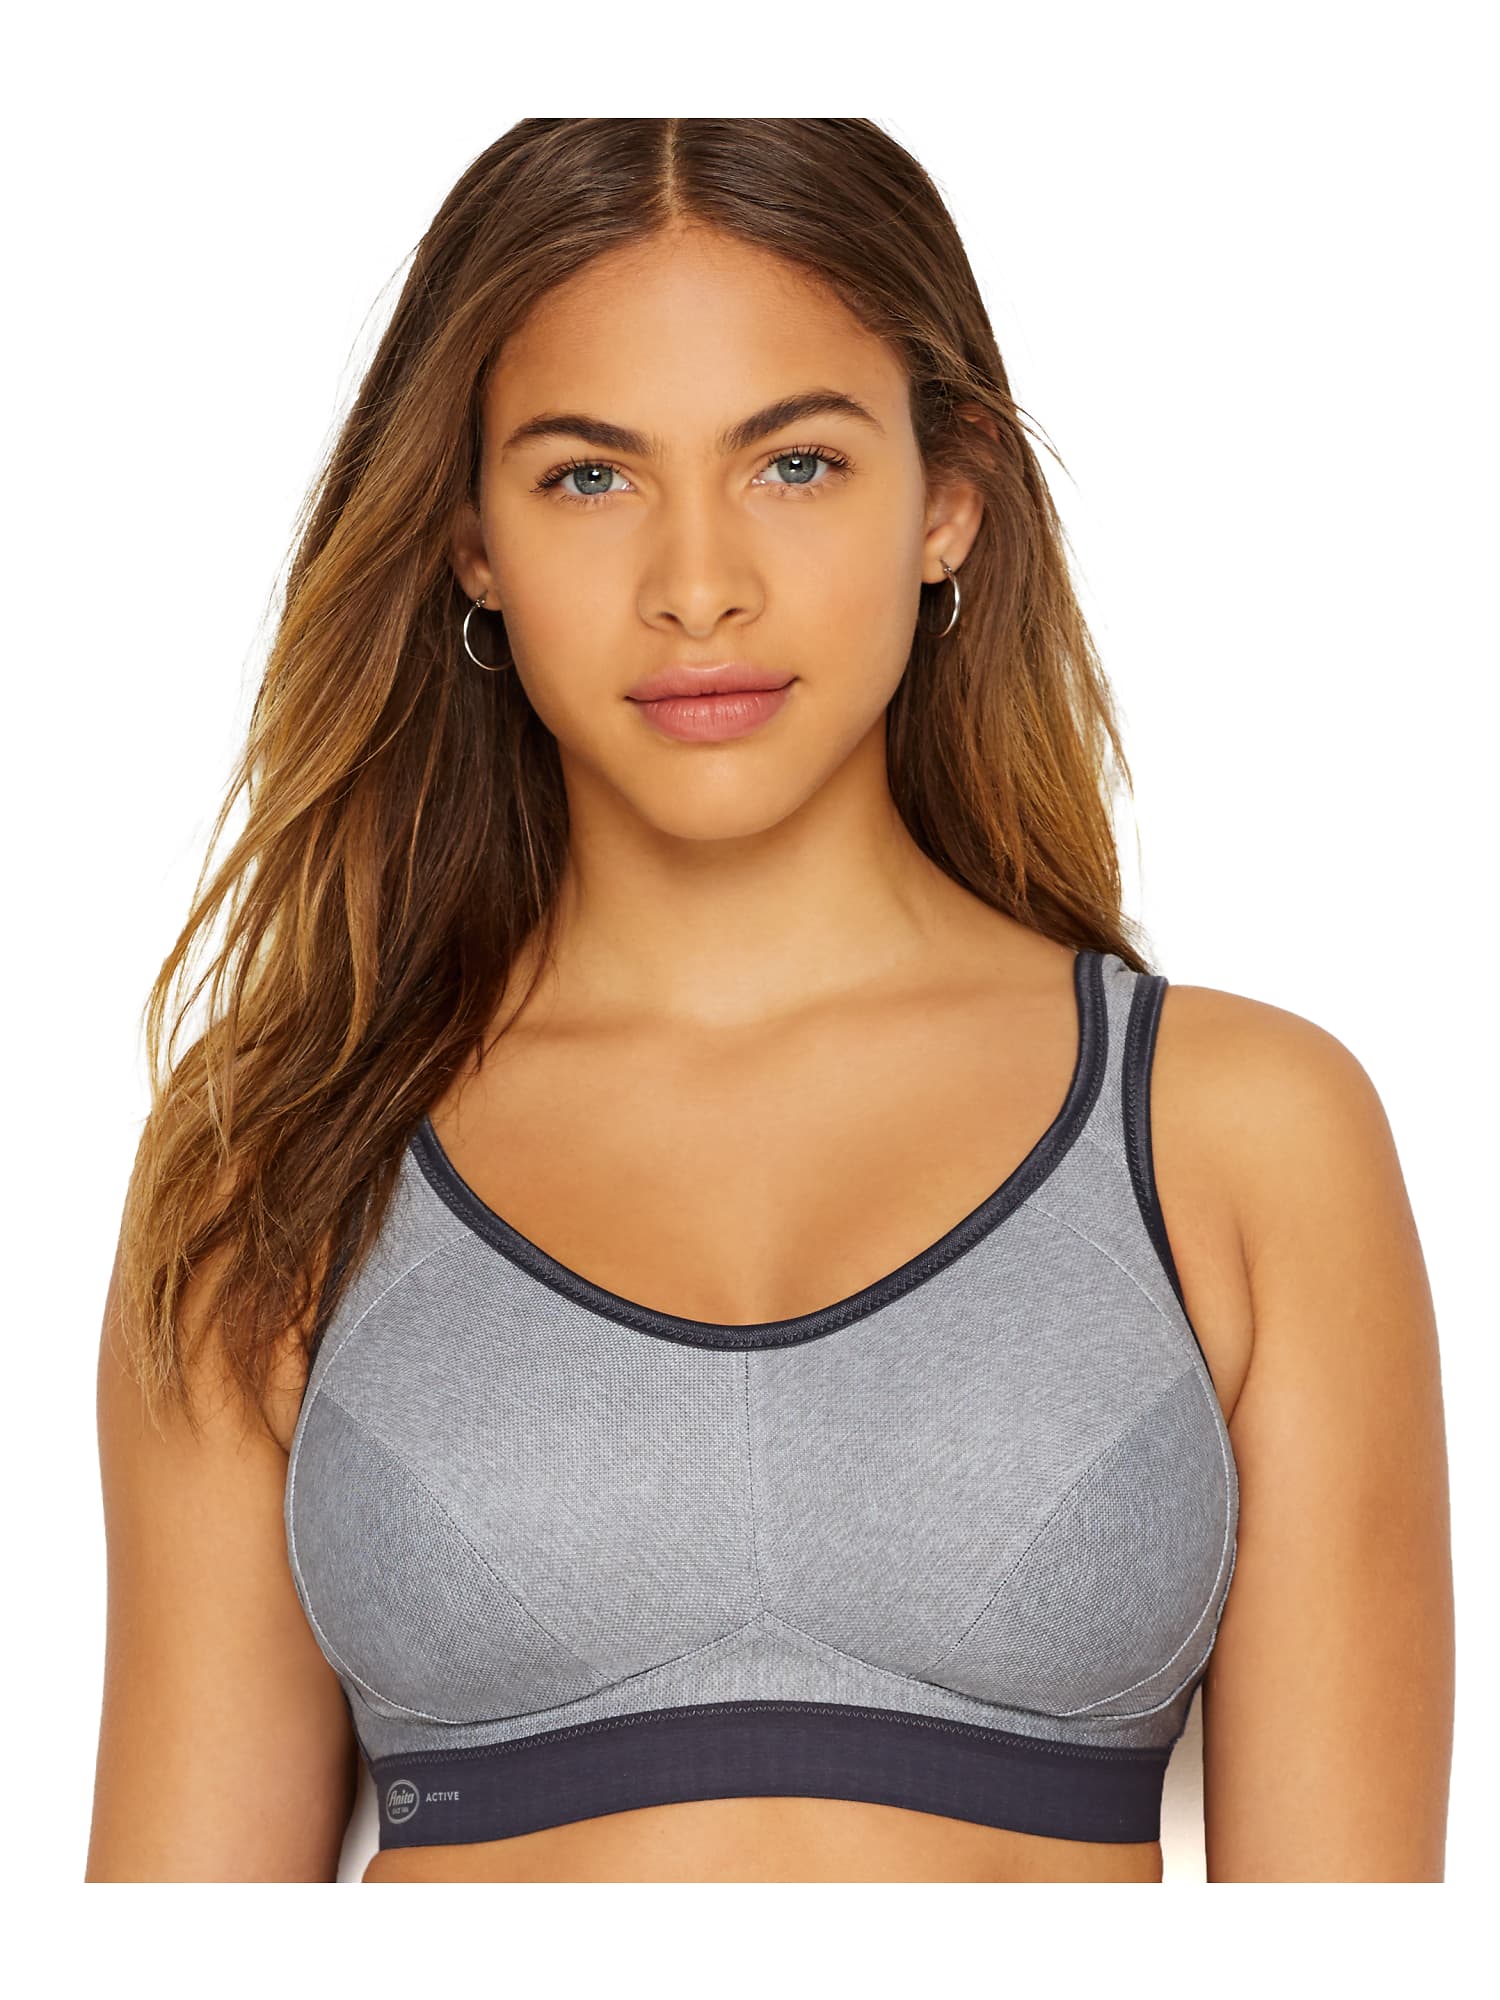 Active Maximum Support Wire Free Sports Bra Heather Grey 40F by Anita